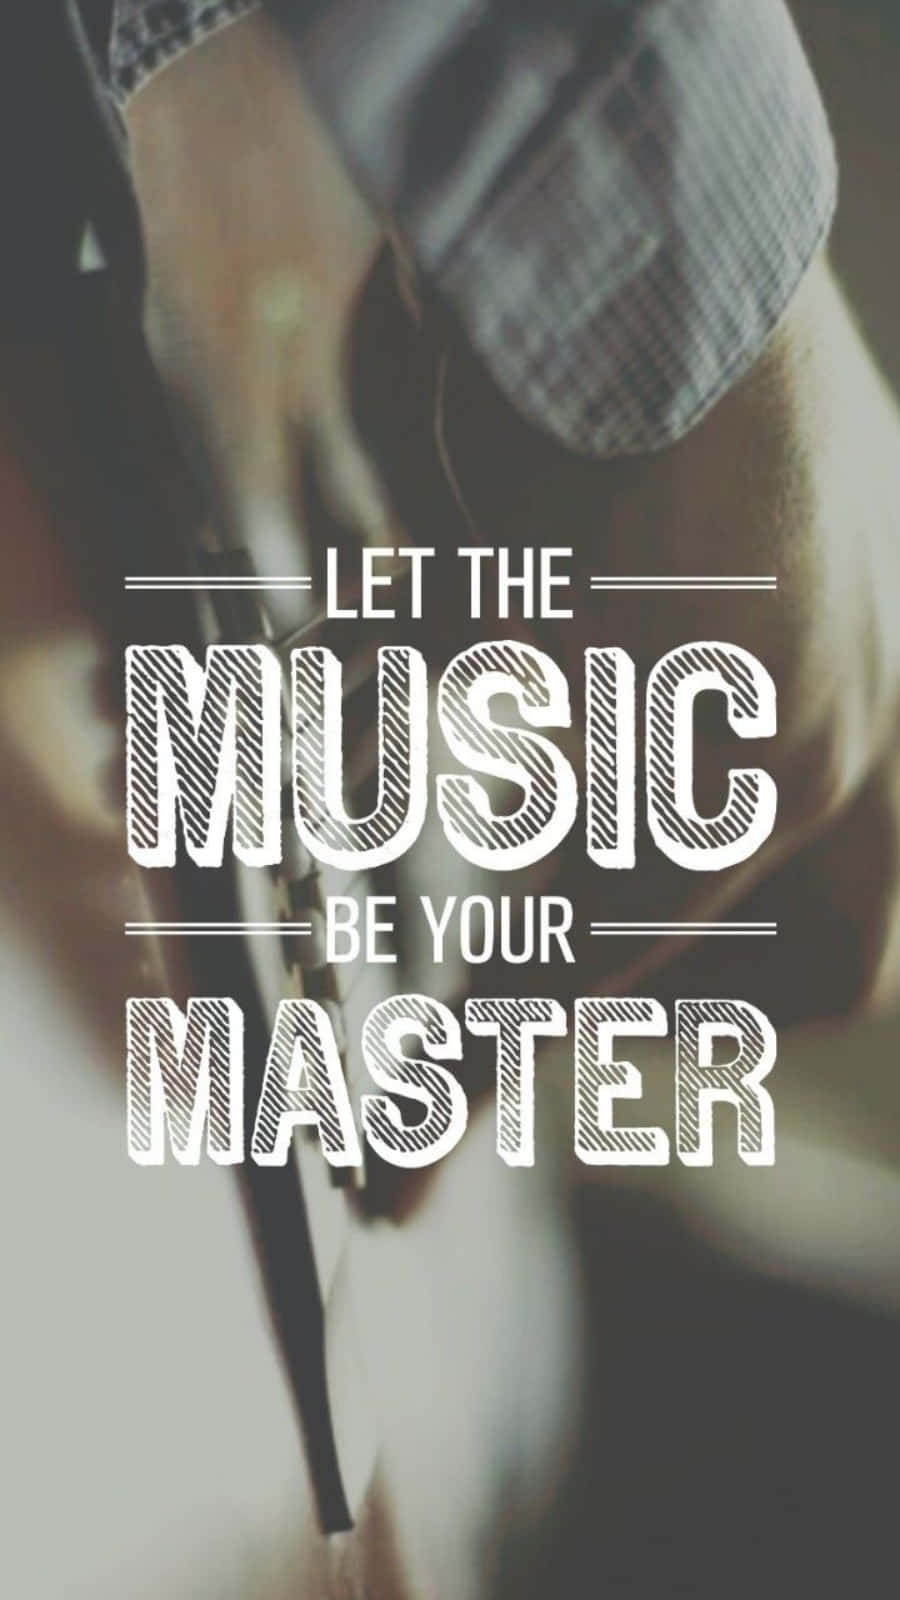 Let The Music Be Your Master Quote Wallpaper